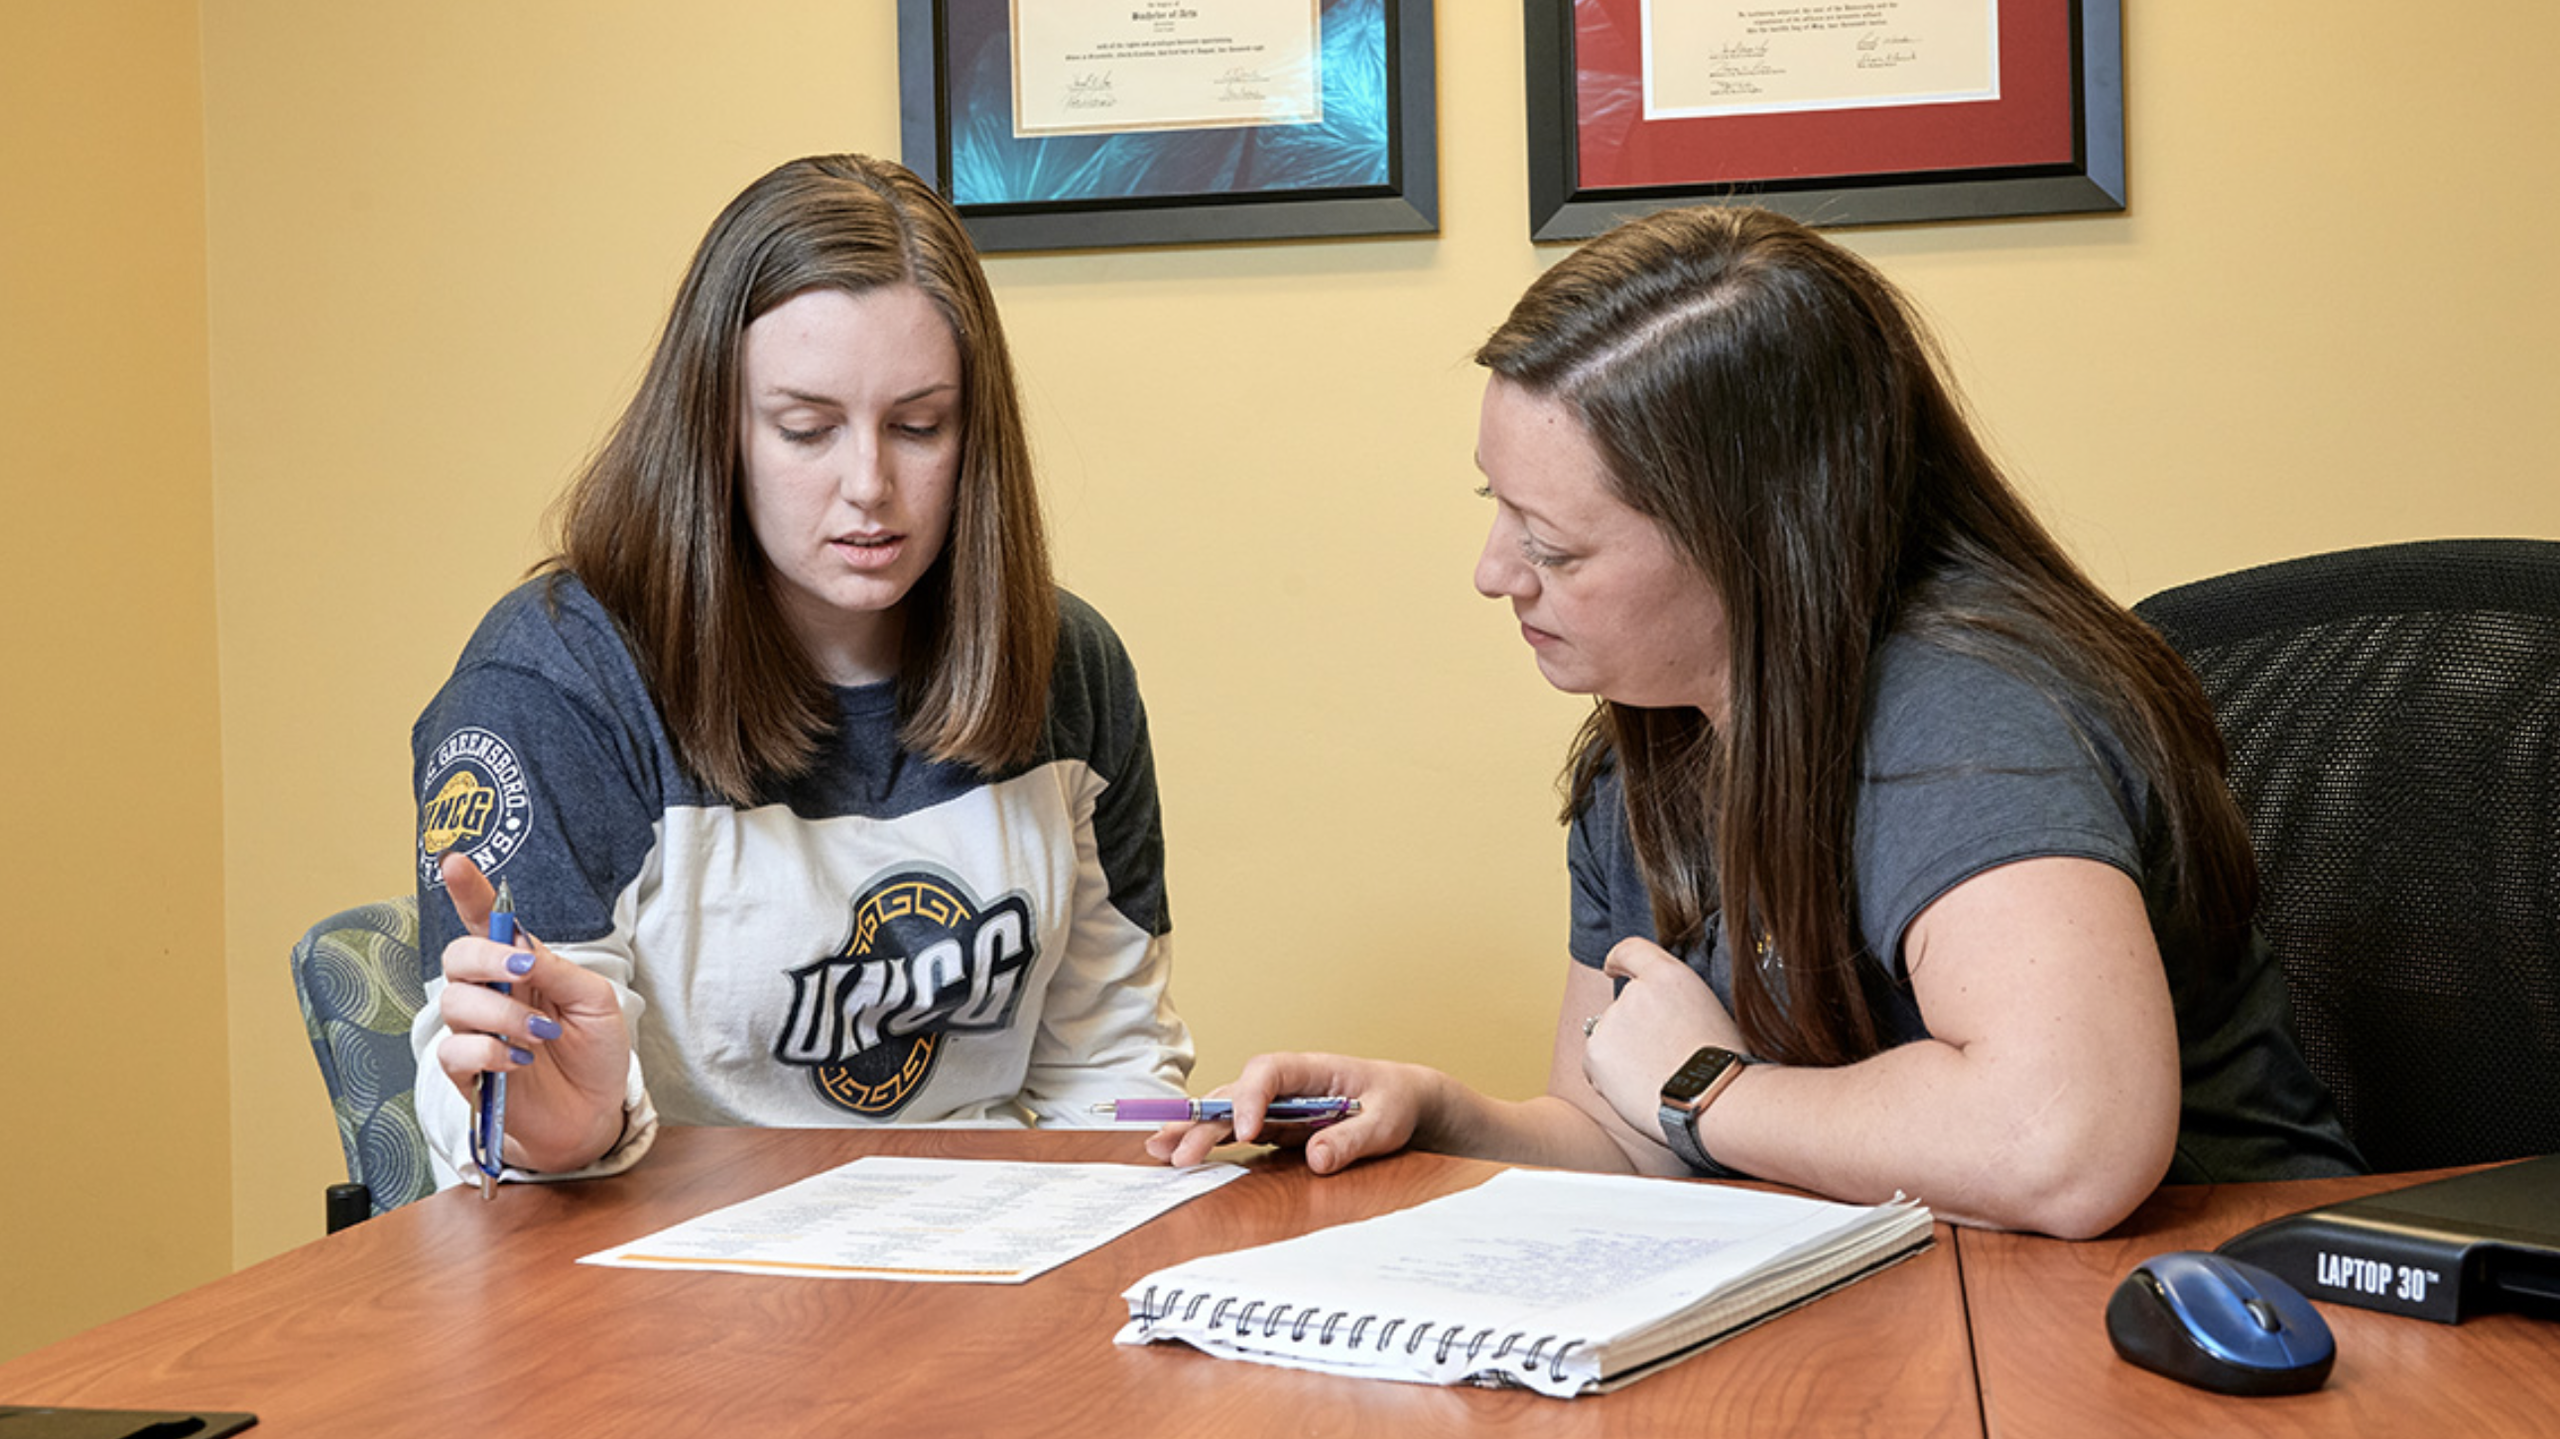 UNCG shares a “GUIDE” to student wellbeing with UNC peers